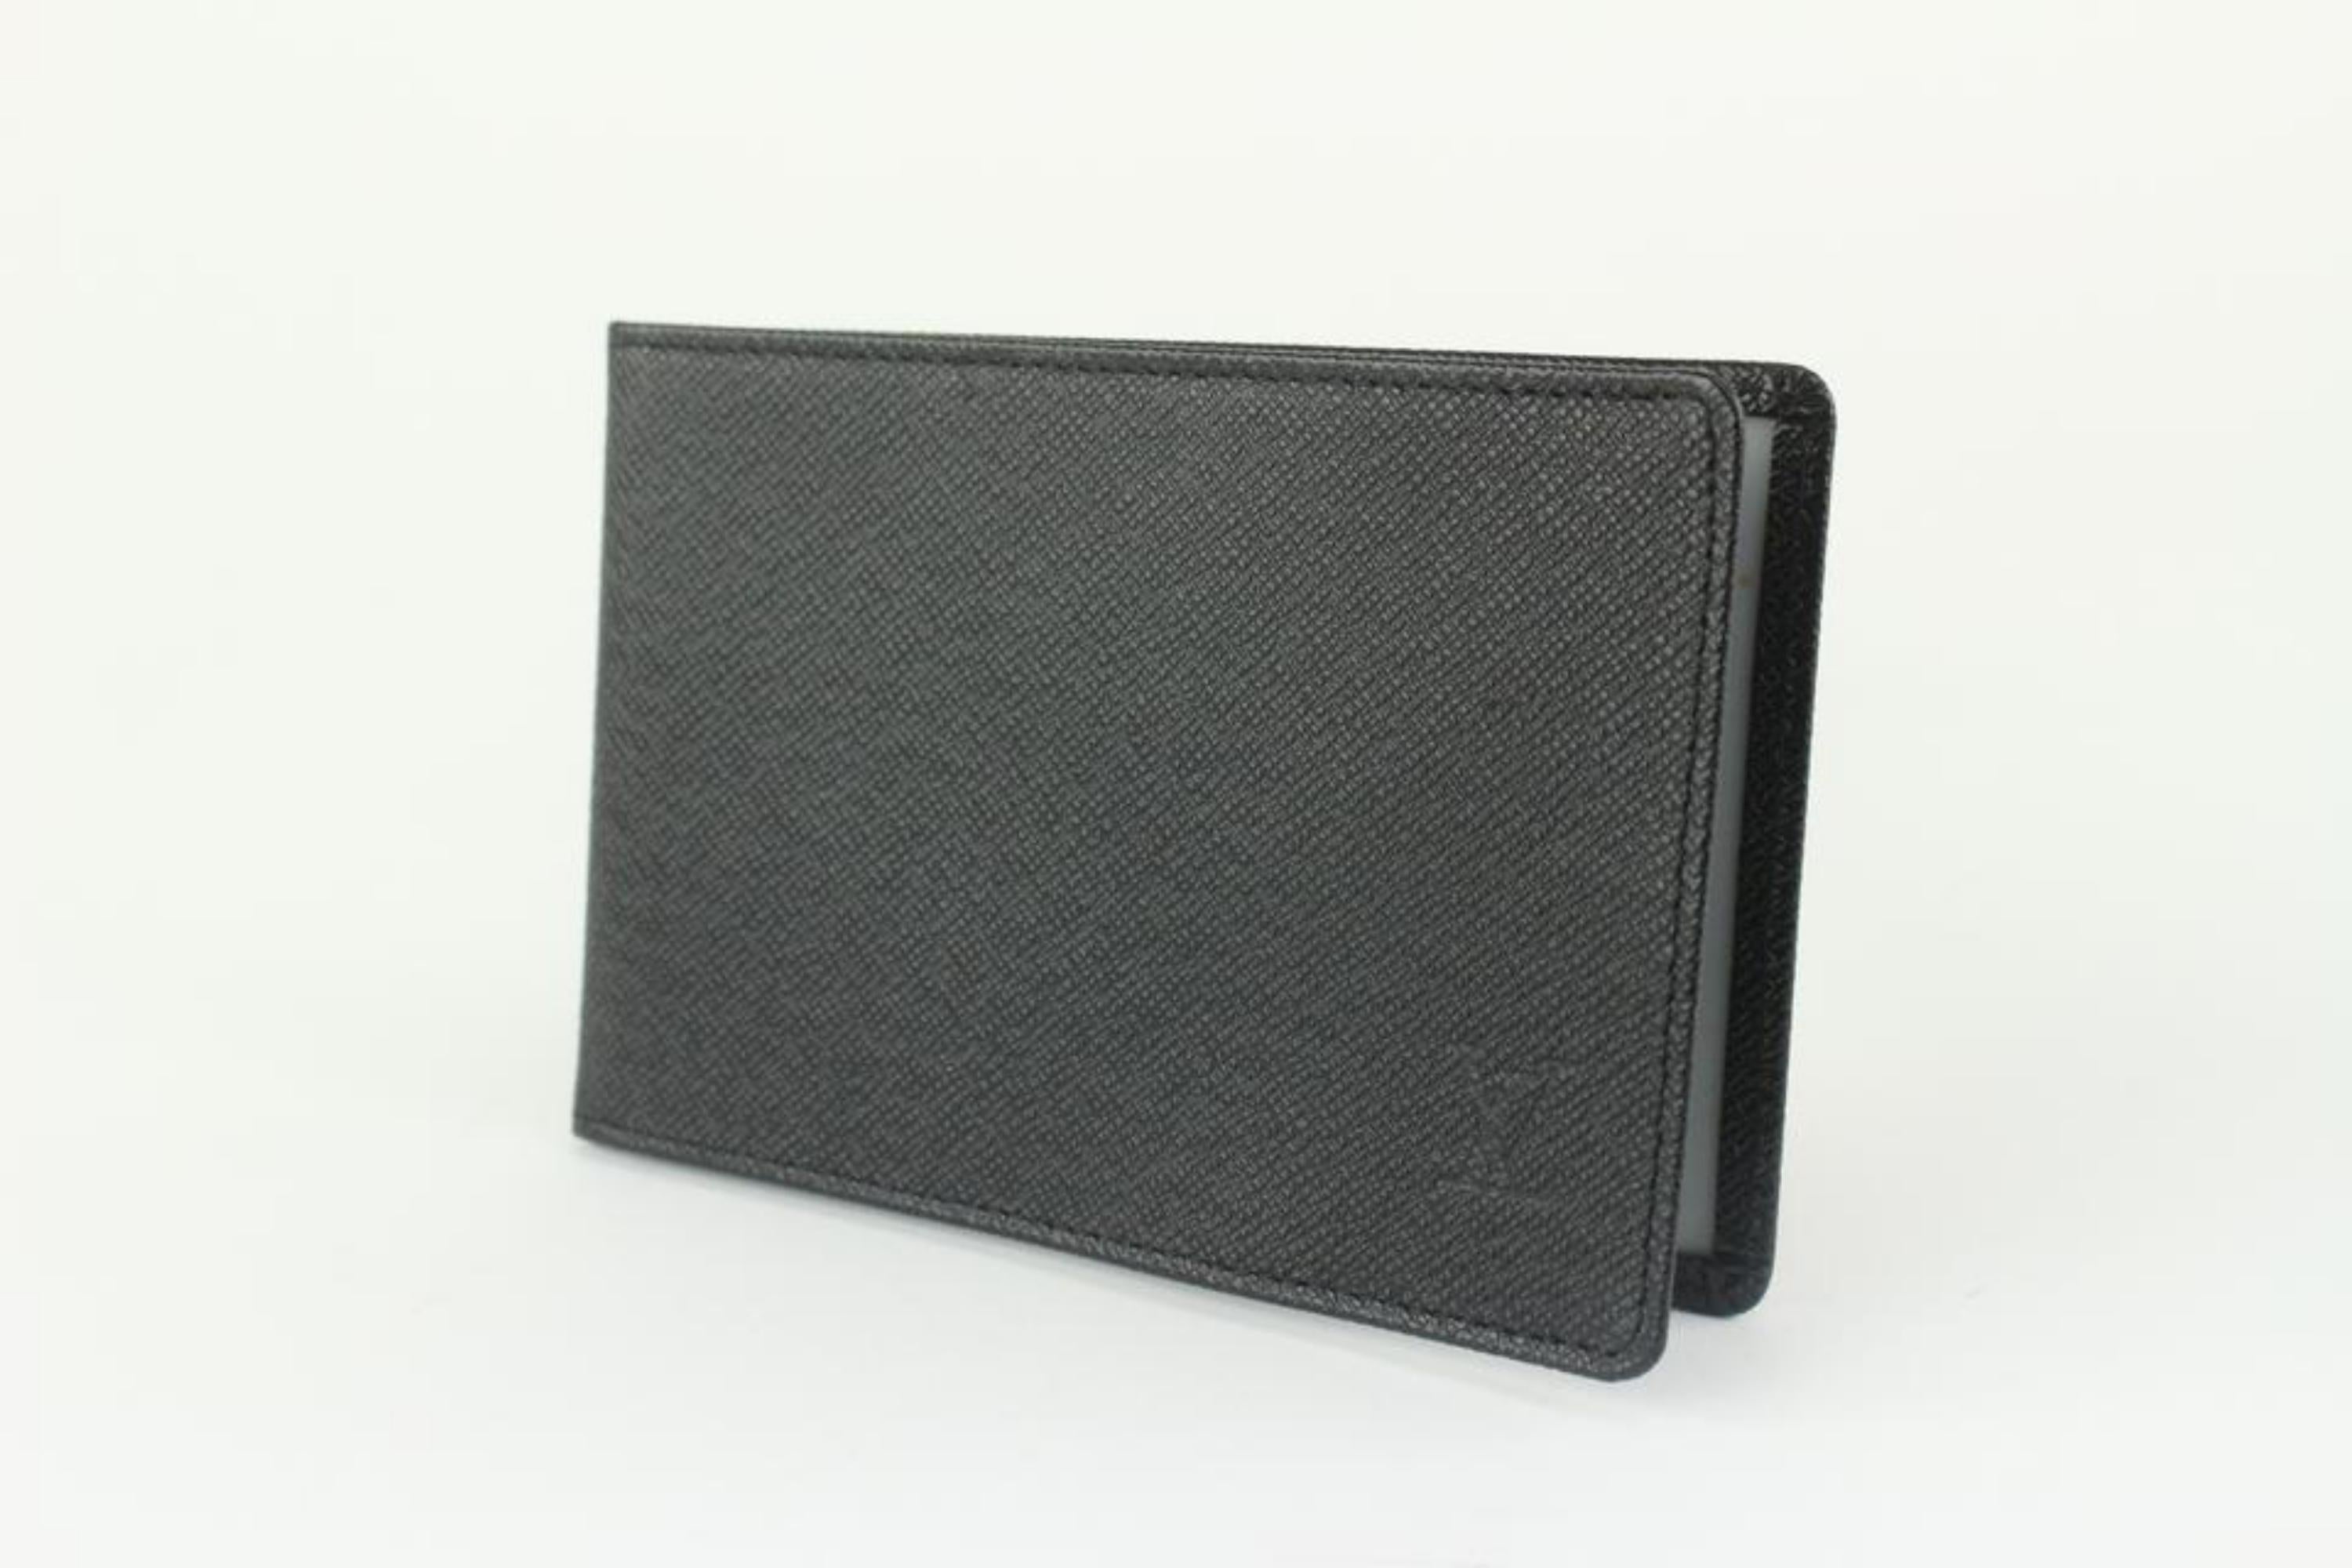 Louis Vuitton Black Taiga Leather Card Holder ID Case 1217lv20 In Excellent Condition For Sale In Dix hills, NY